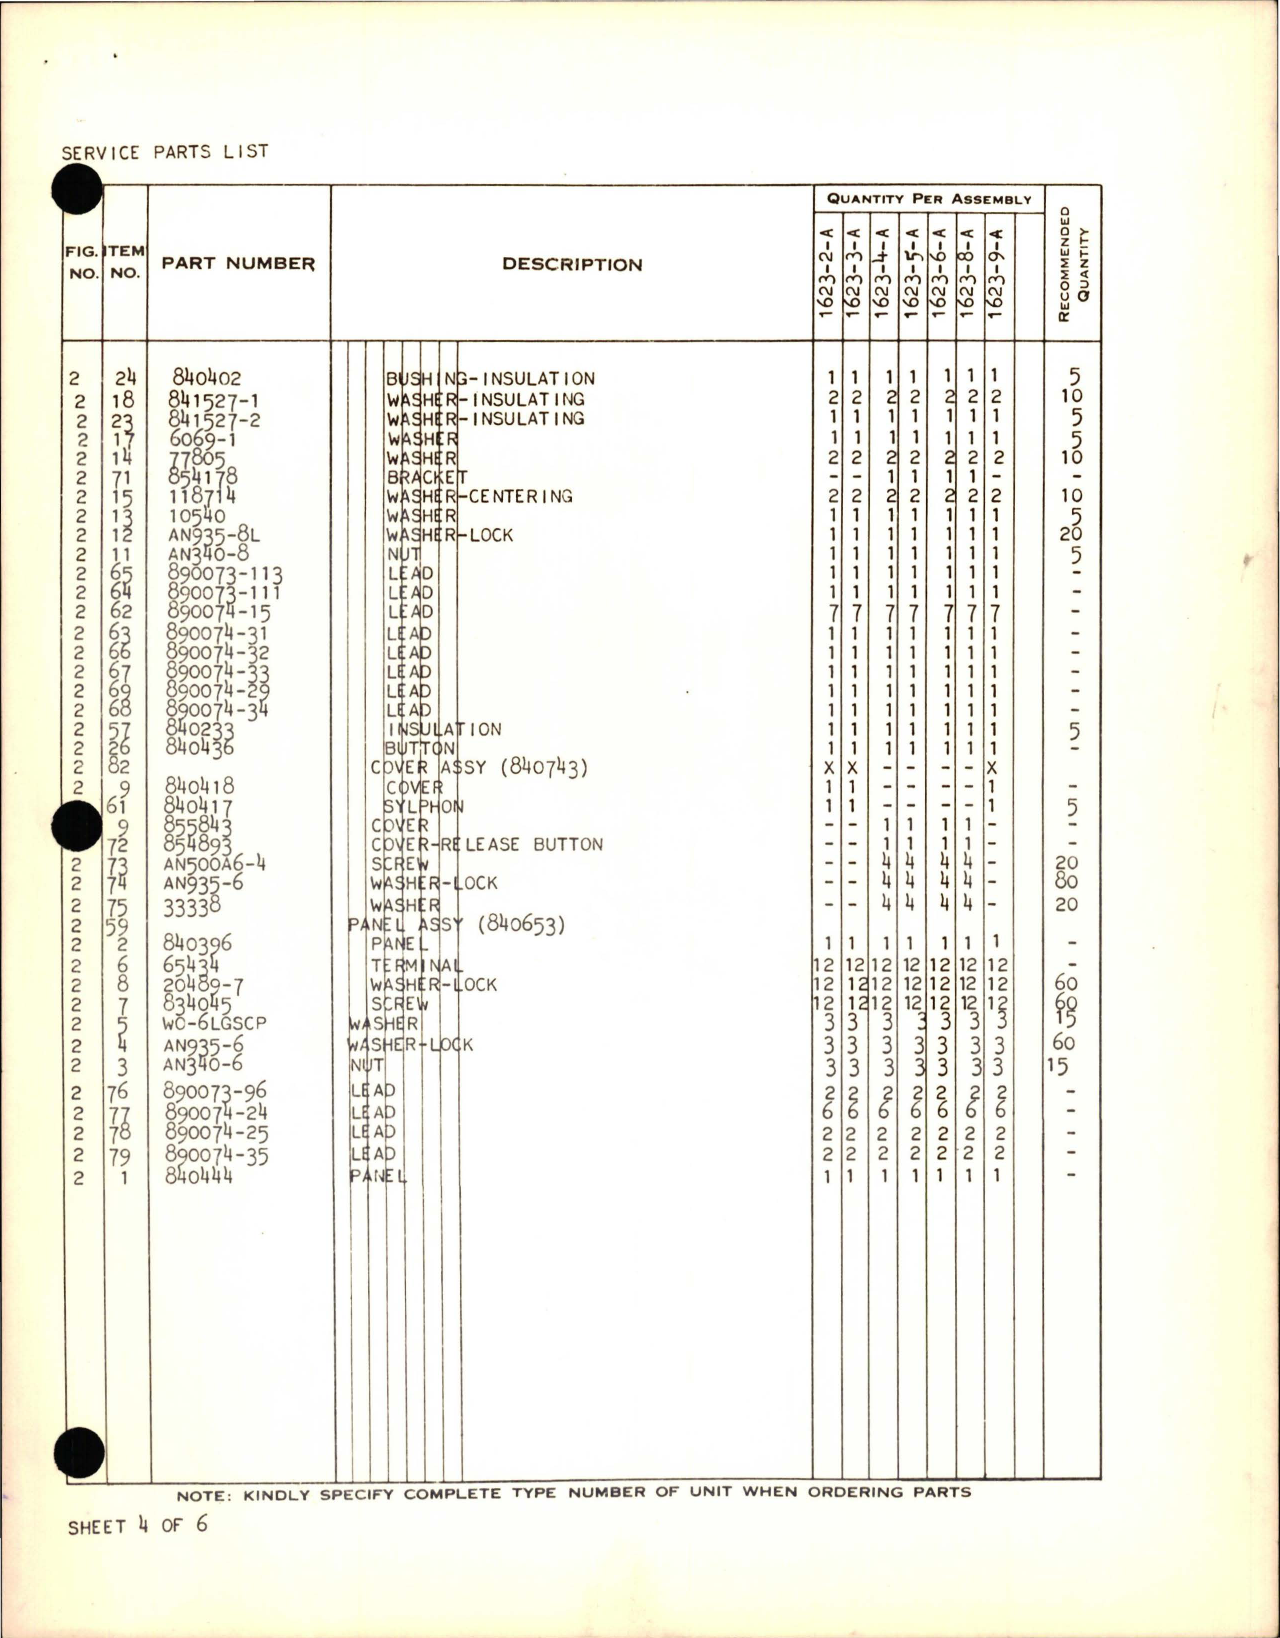 Sample page 5 from AirCorps Library document: Service Parts List for Overvoltage Protector - Type 1623 Series